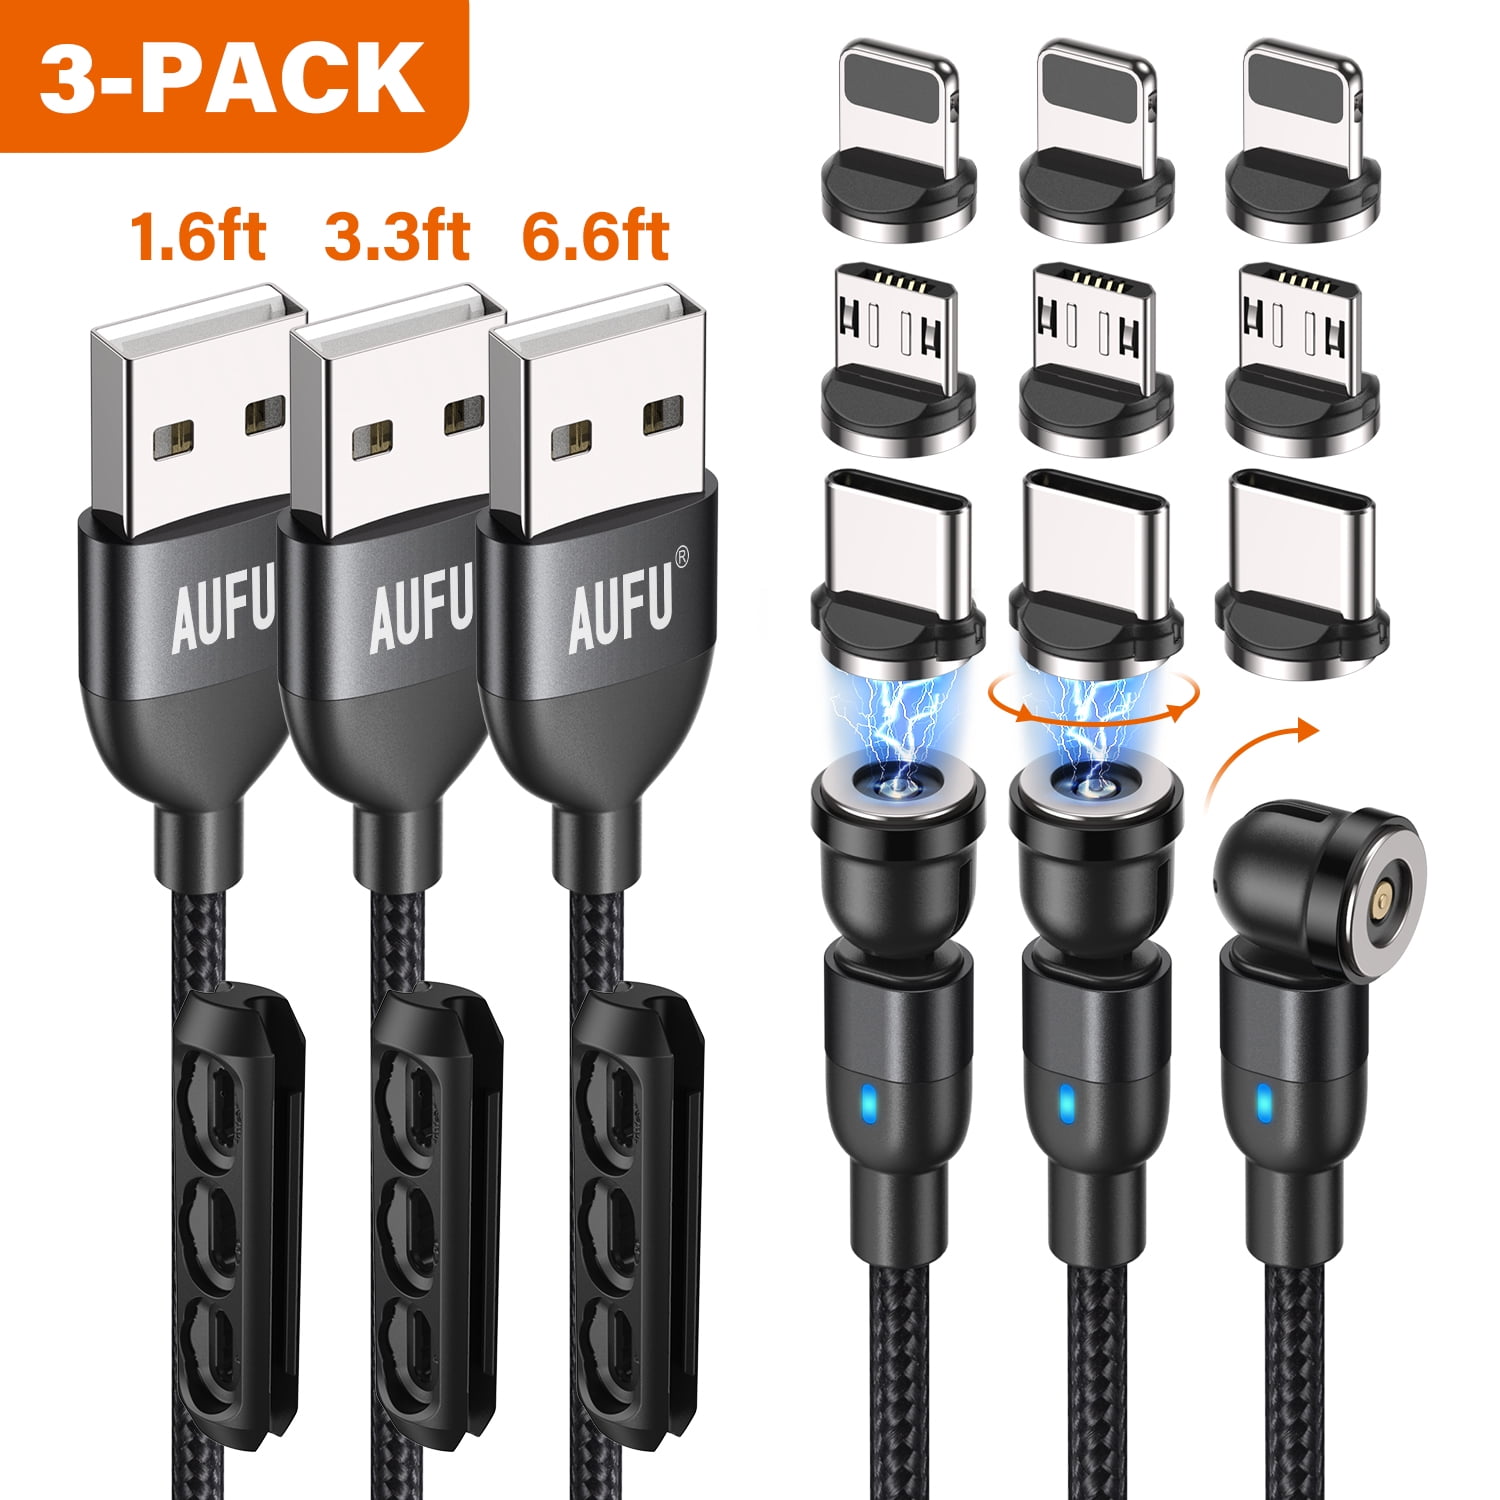 AUFU 3 in 1 Magnetic Charging Cable [3Pack-6.6ft/3.3ft/1.6ft], 540